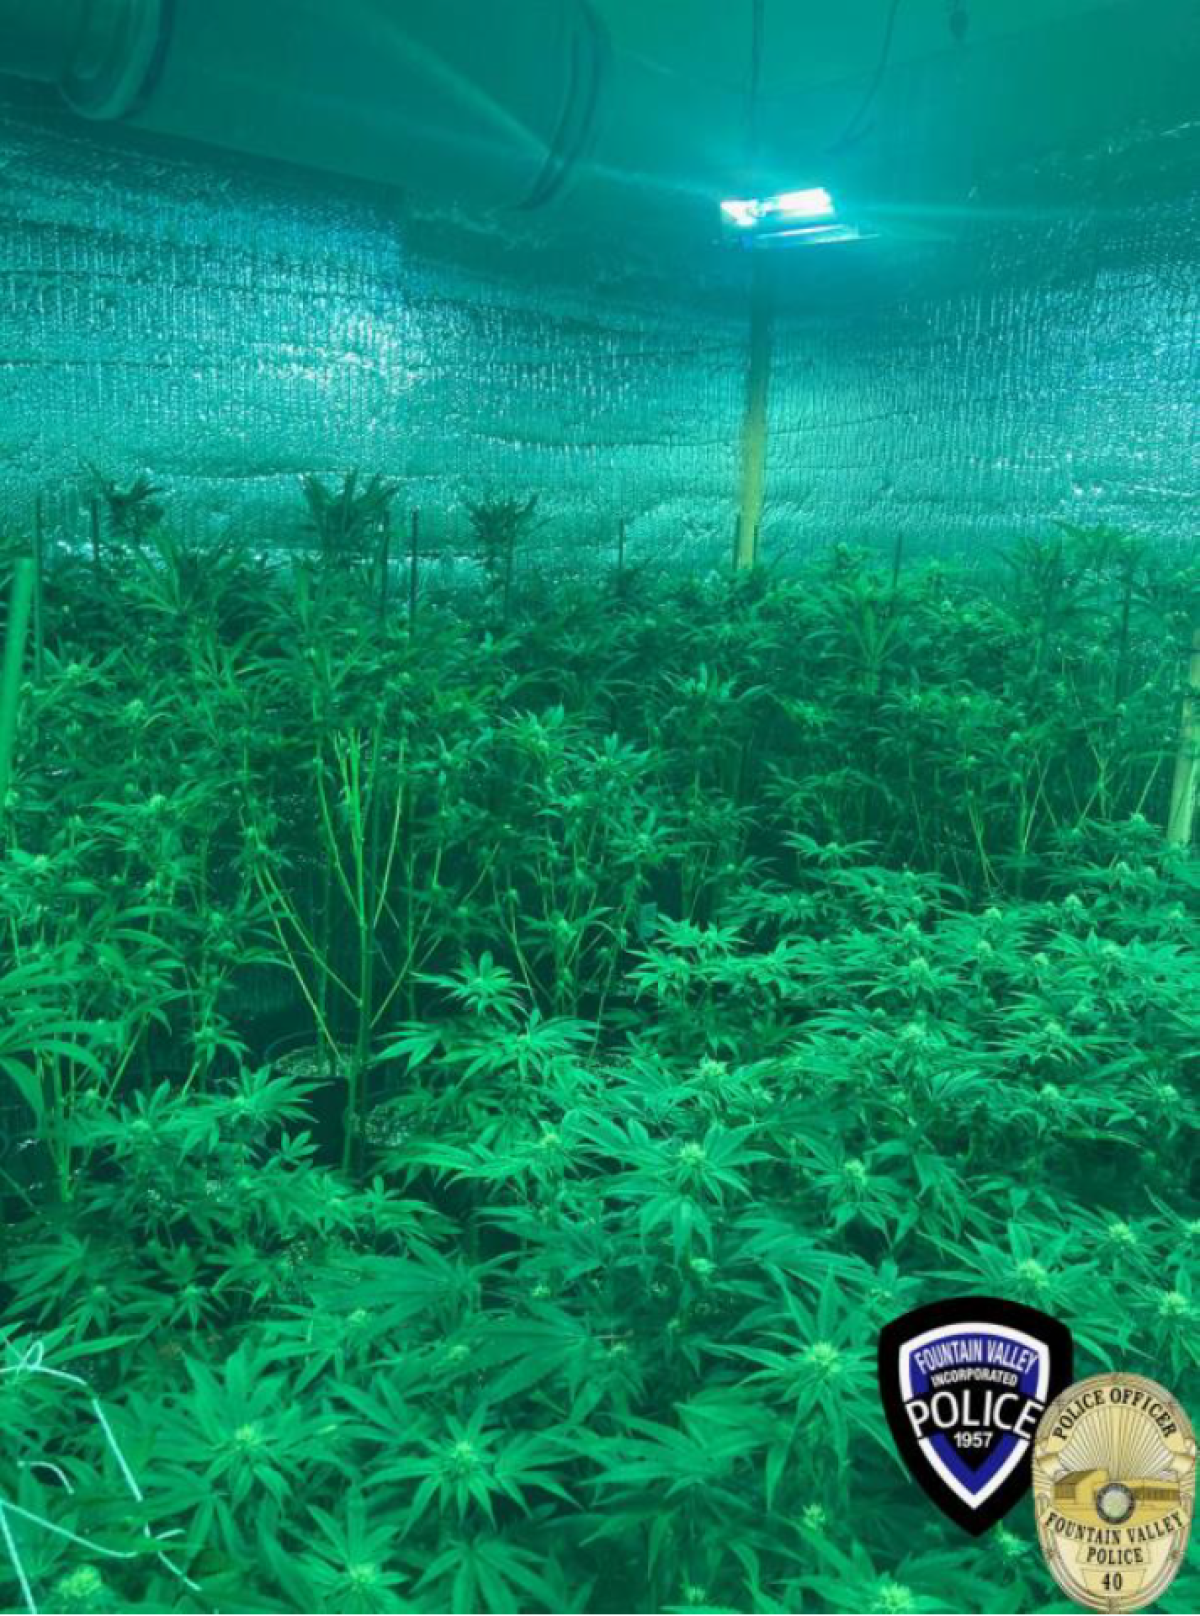 Scene from an illegal marijuana growing operation in Fountain Valley.